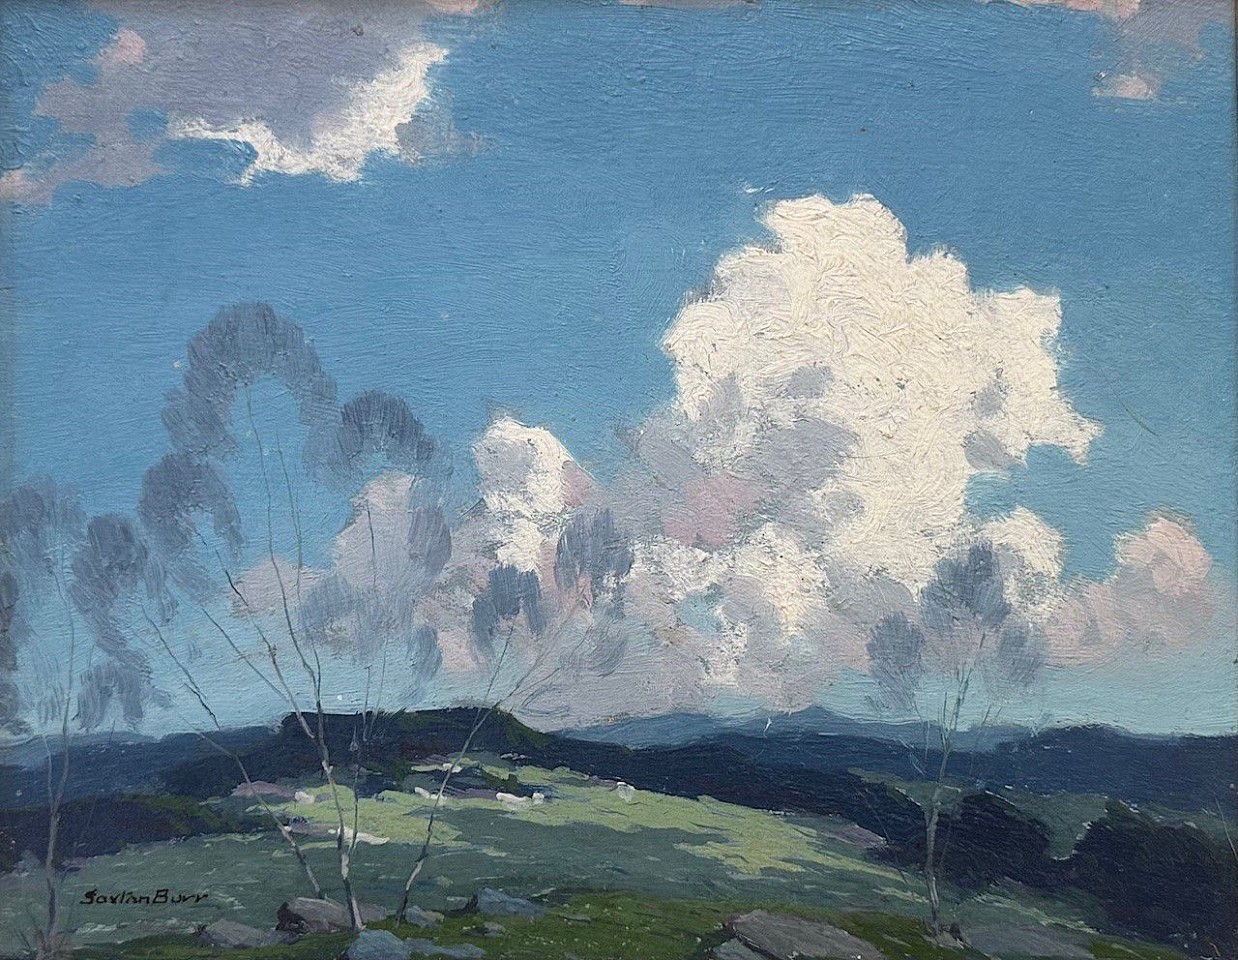 H. Saxton Burr, On The Hilltop
oil on board, 8"" x 10""
JC1223.02
$850